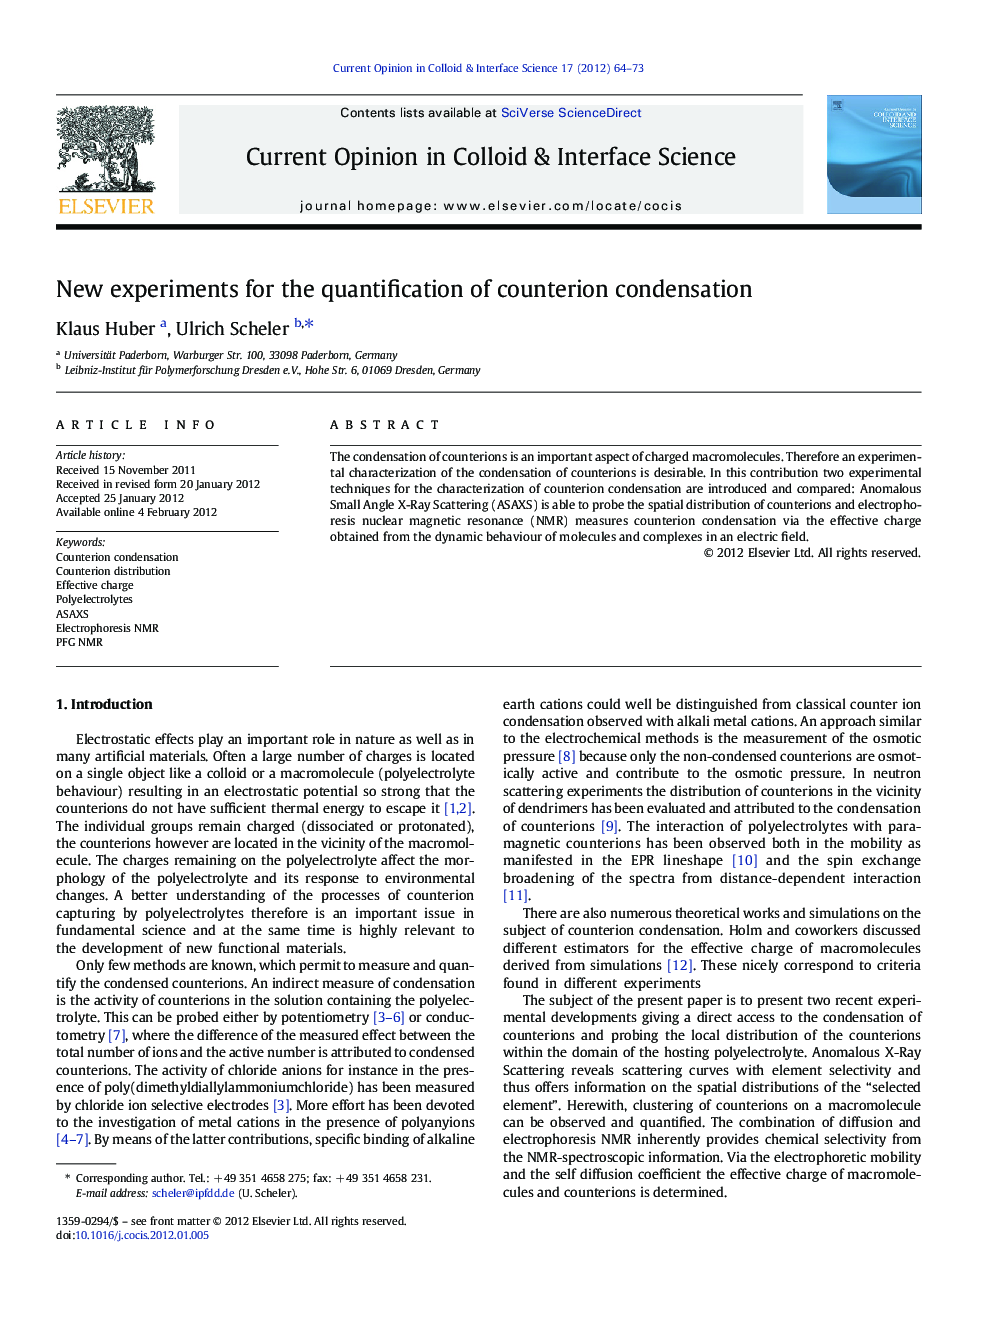 New experiments for the quantification of counterion condensation